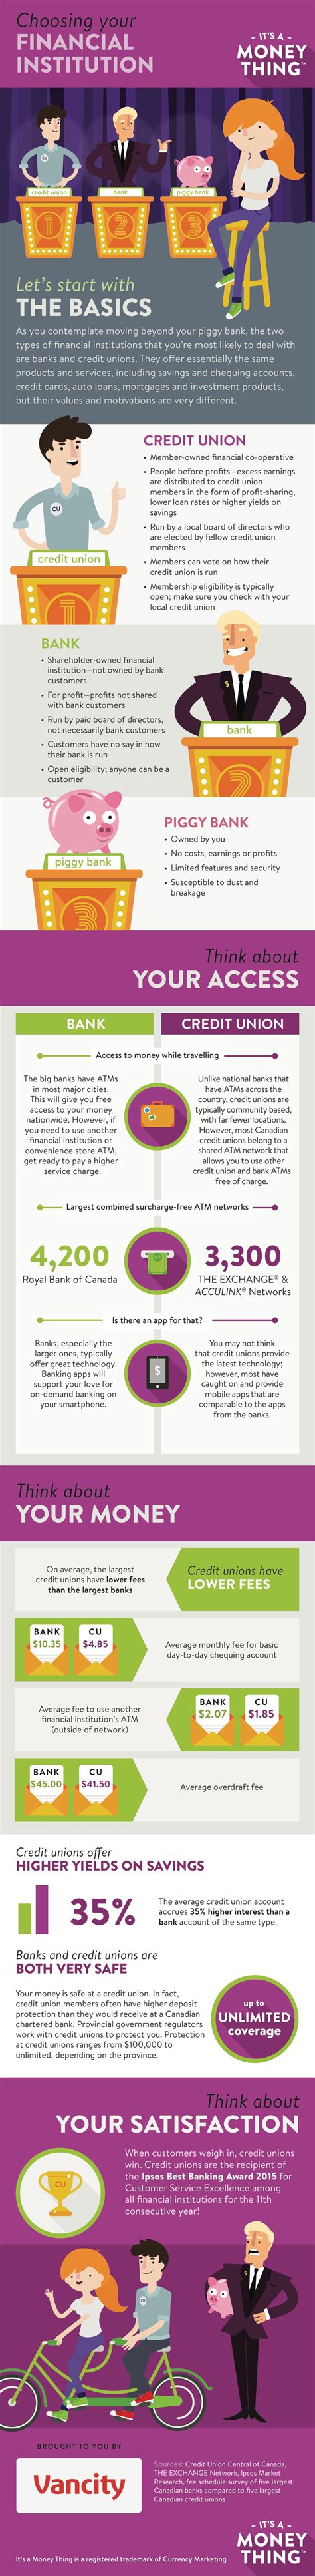 This Infographic Explains The Differences Between Banks And Credit